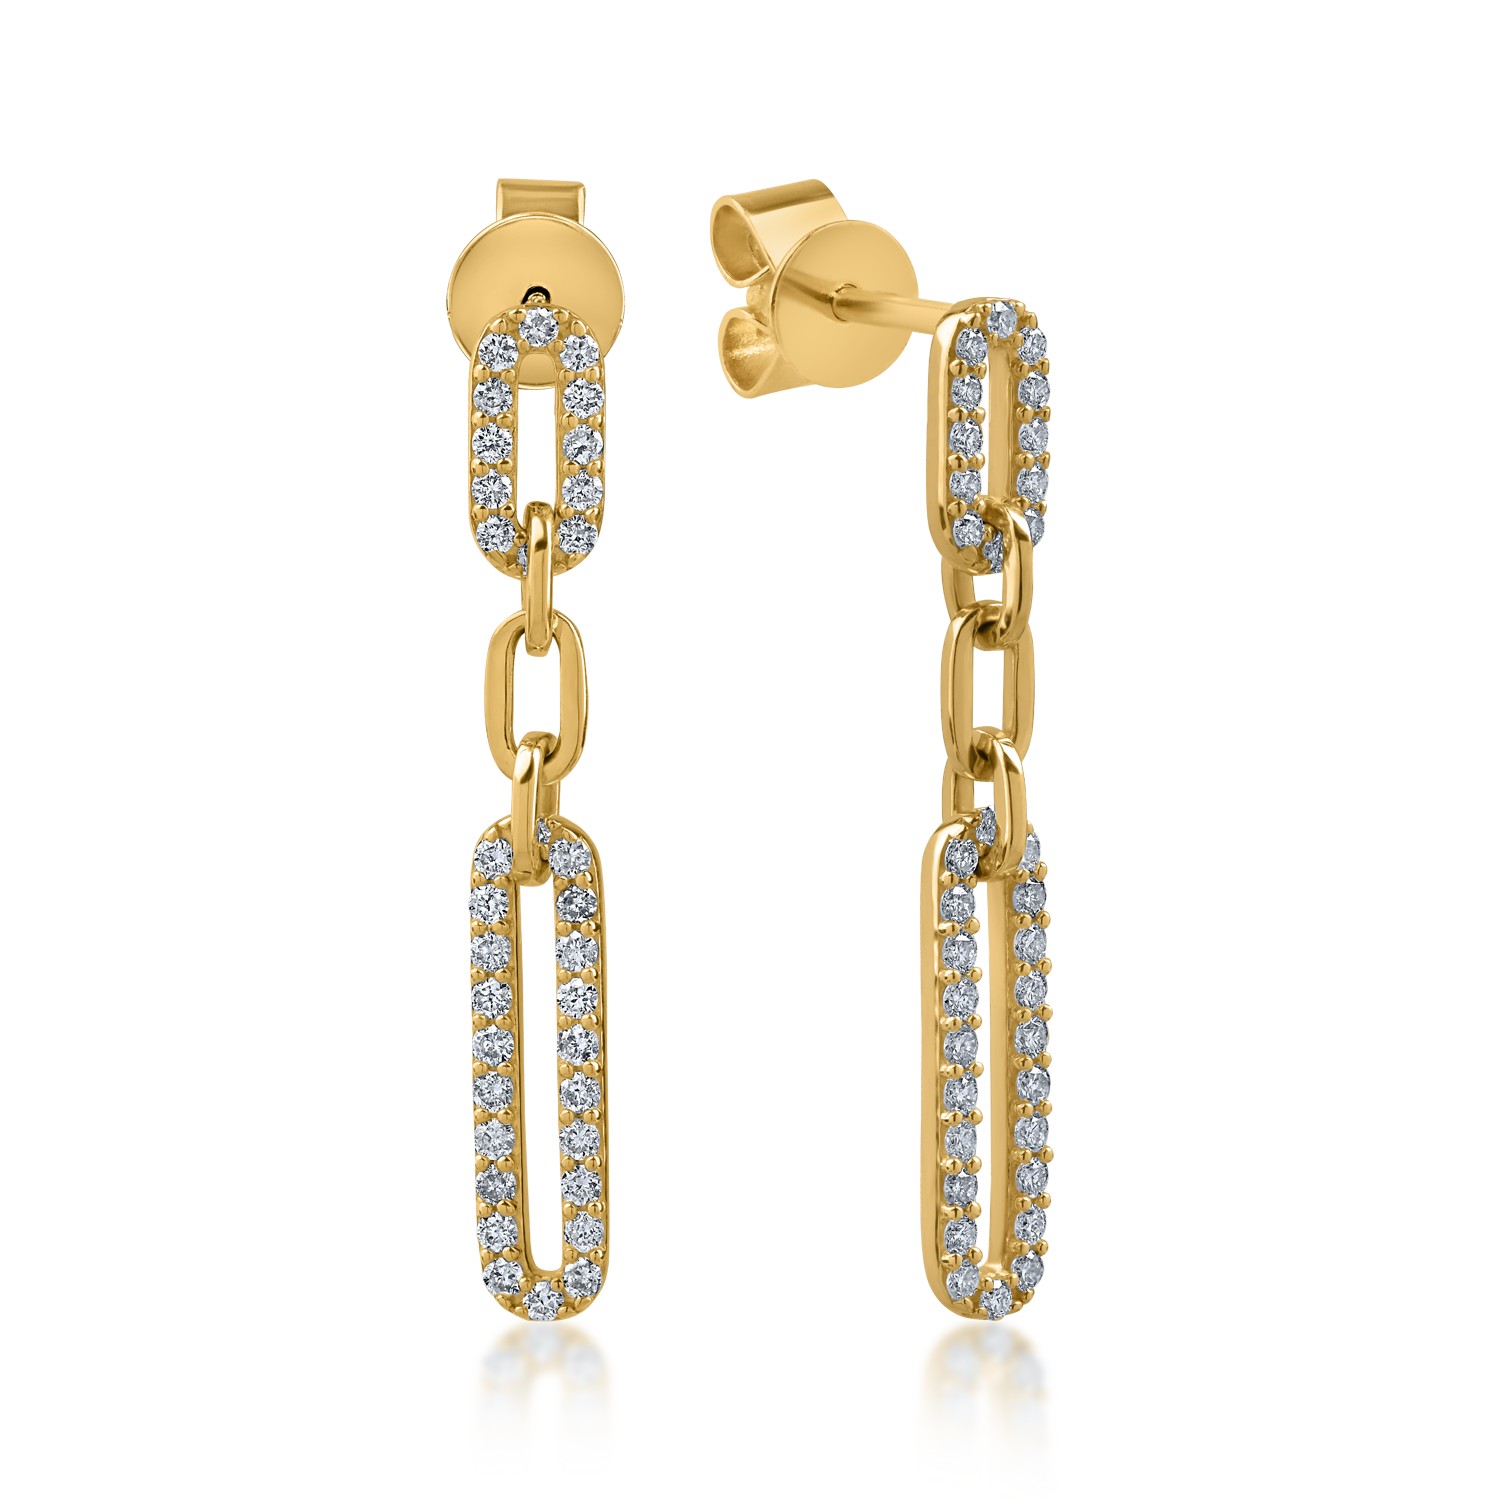 Yellow gold earrings with 0.5ct diamonds